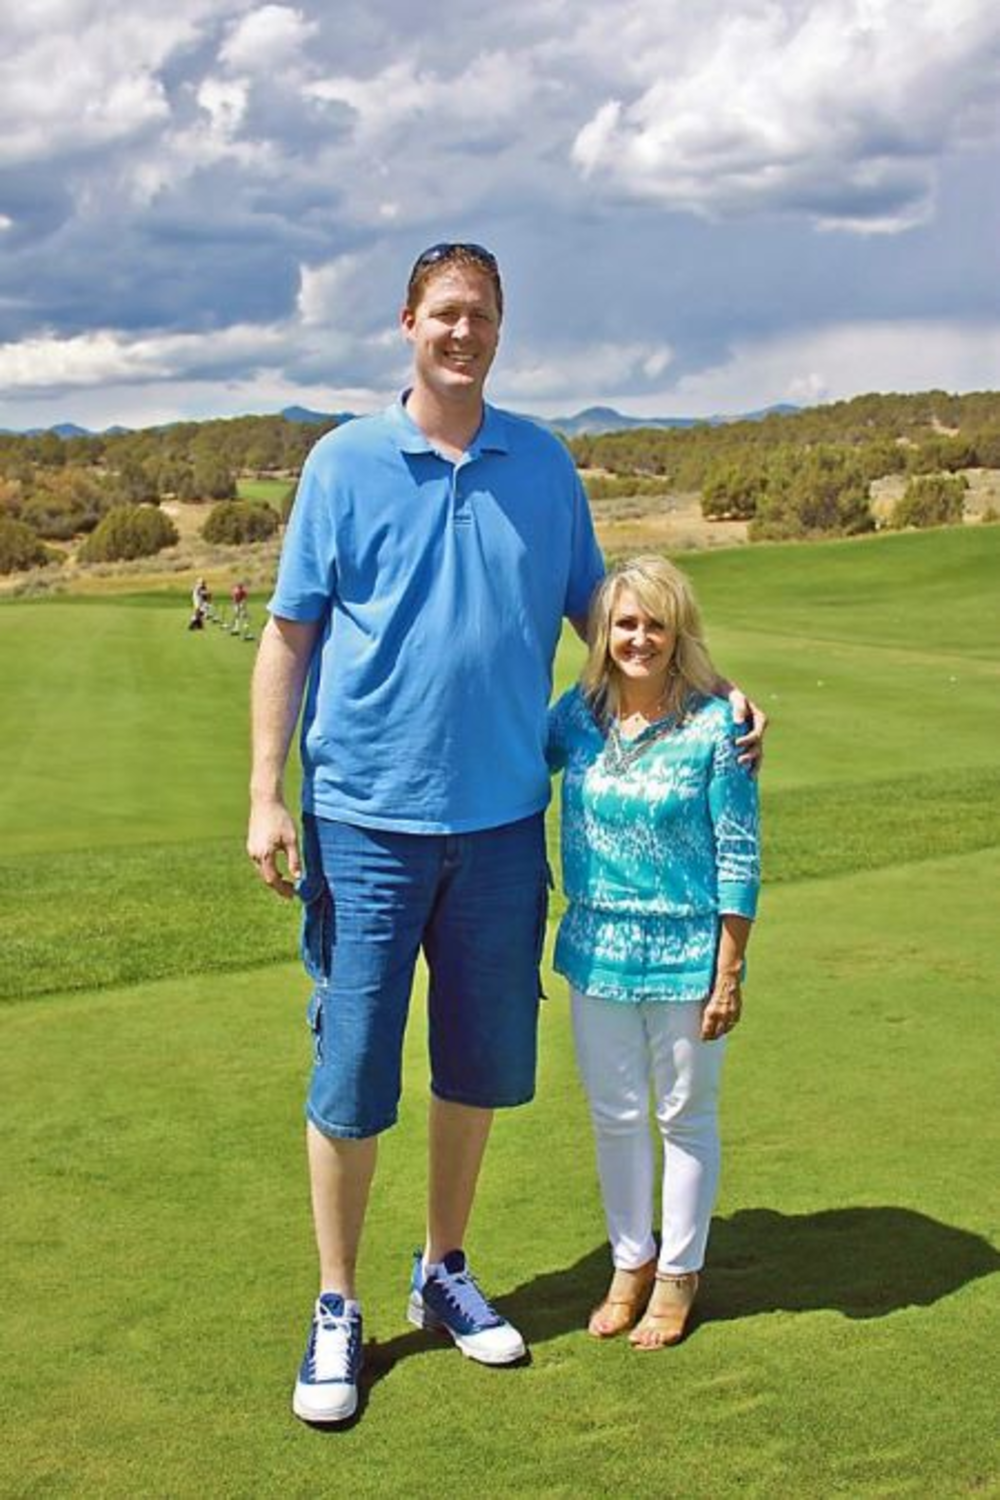 annette-evertson-with-husband-shawn-bradley-1560408788